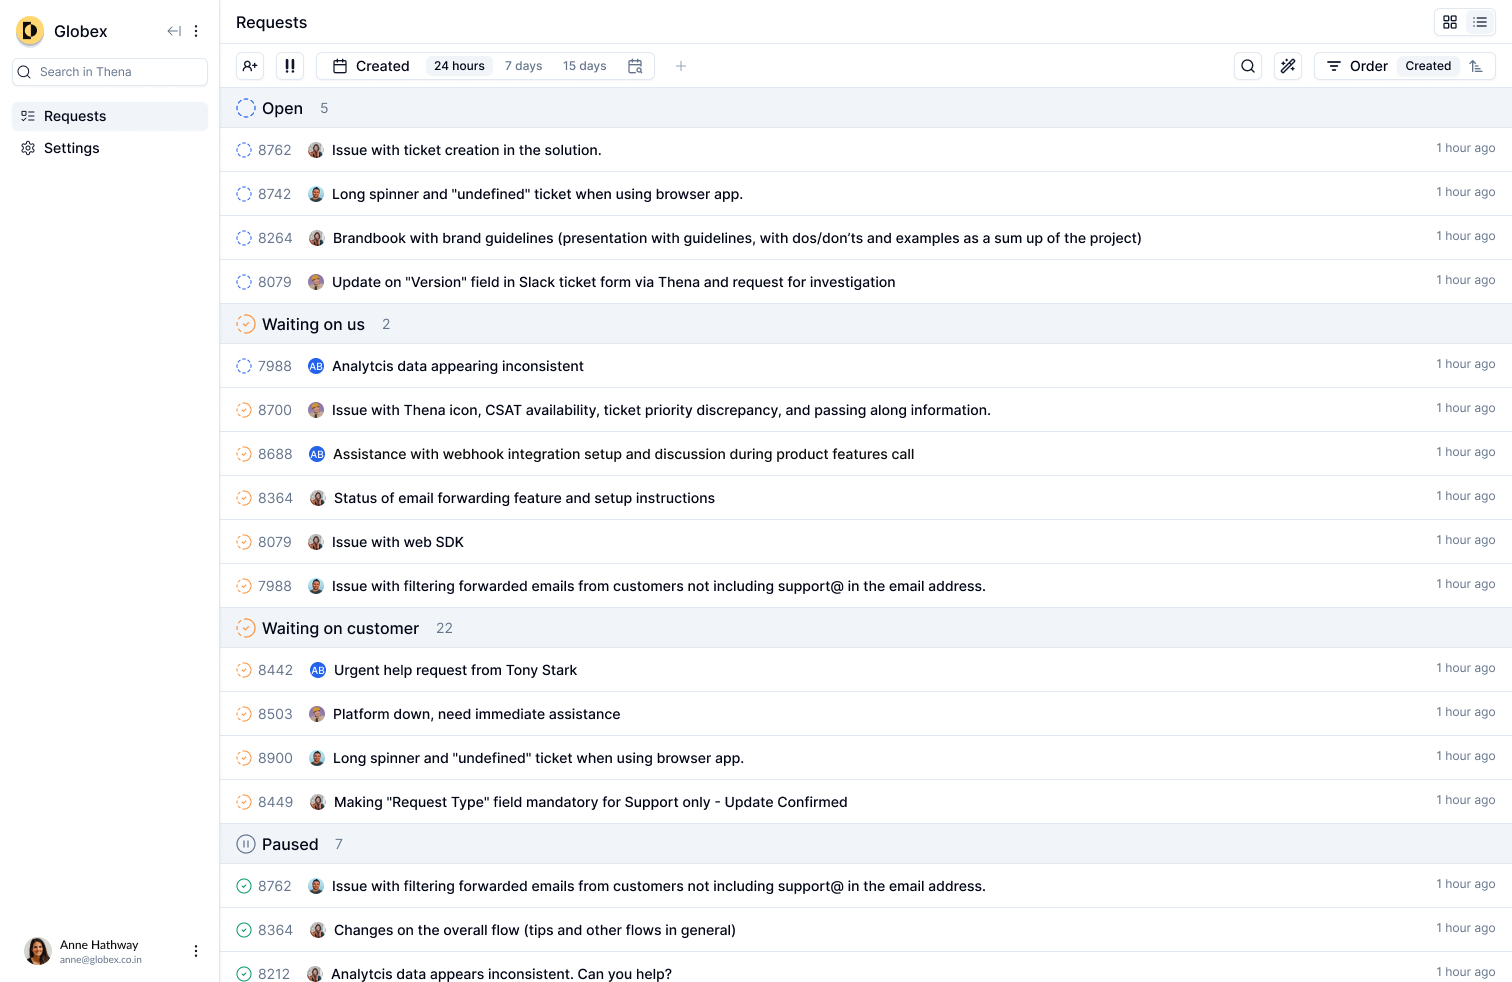 Track all conversations from Slack, email, and web chat in a single place 